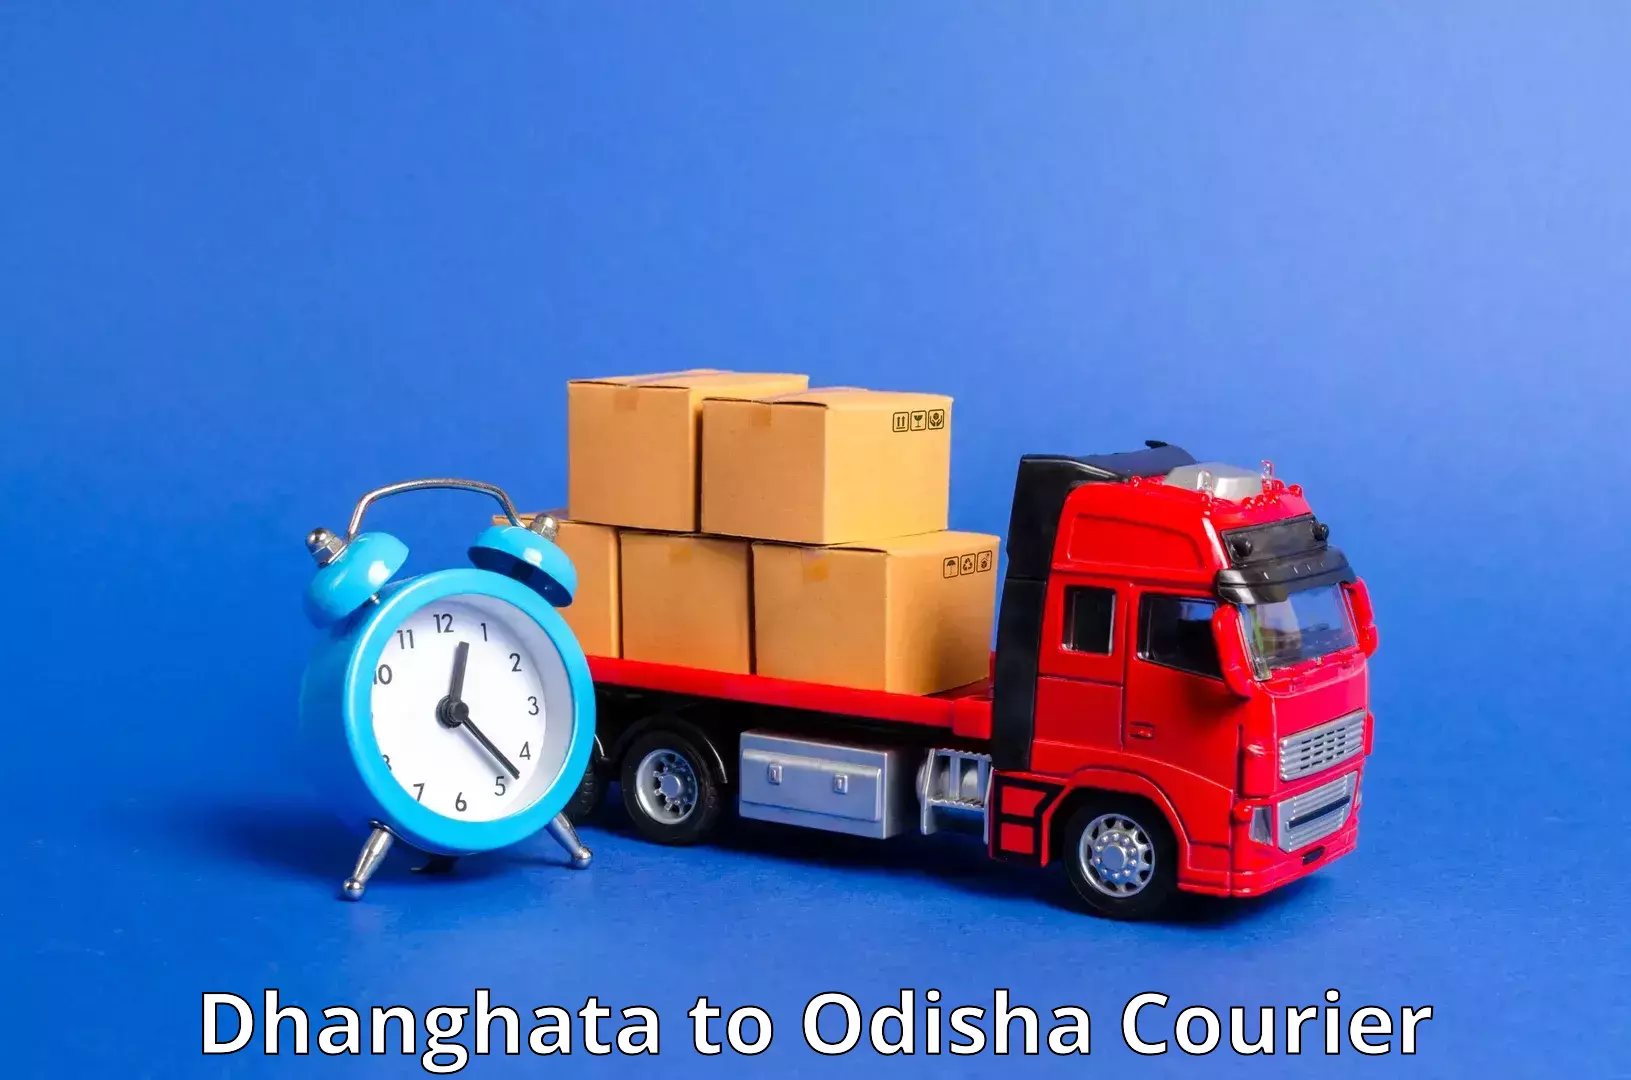 Express package services Dhanghata to Dukura